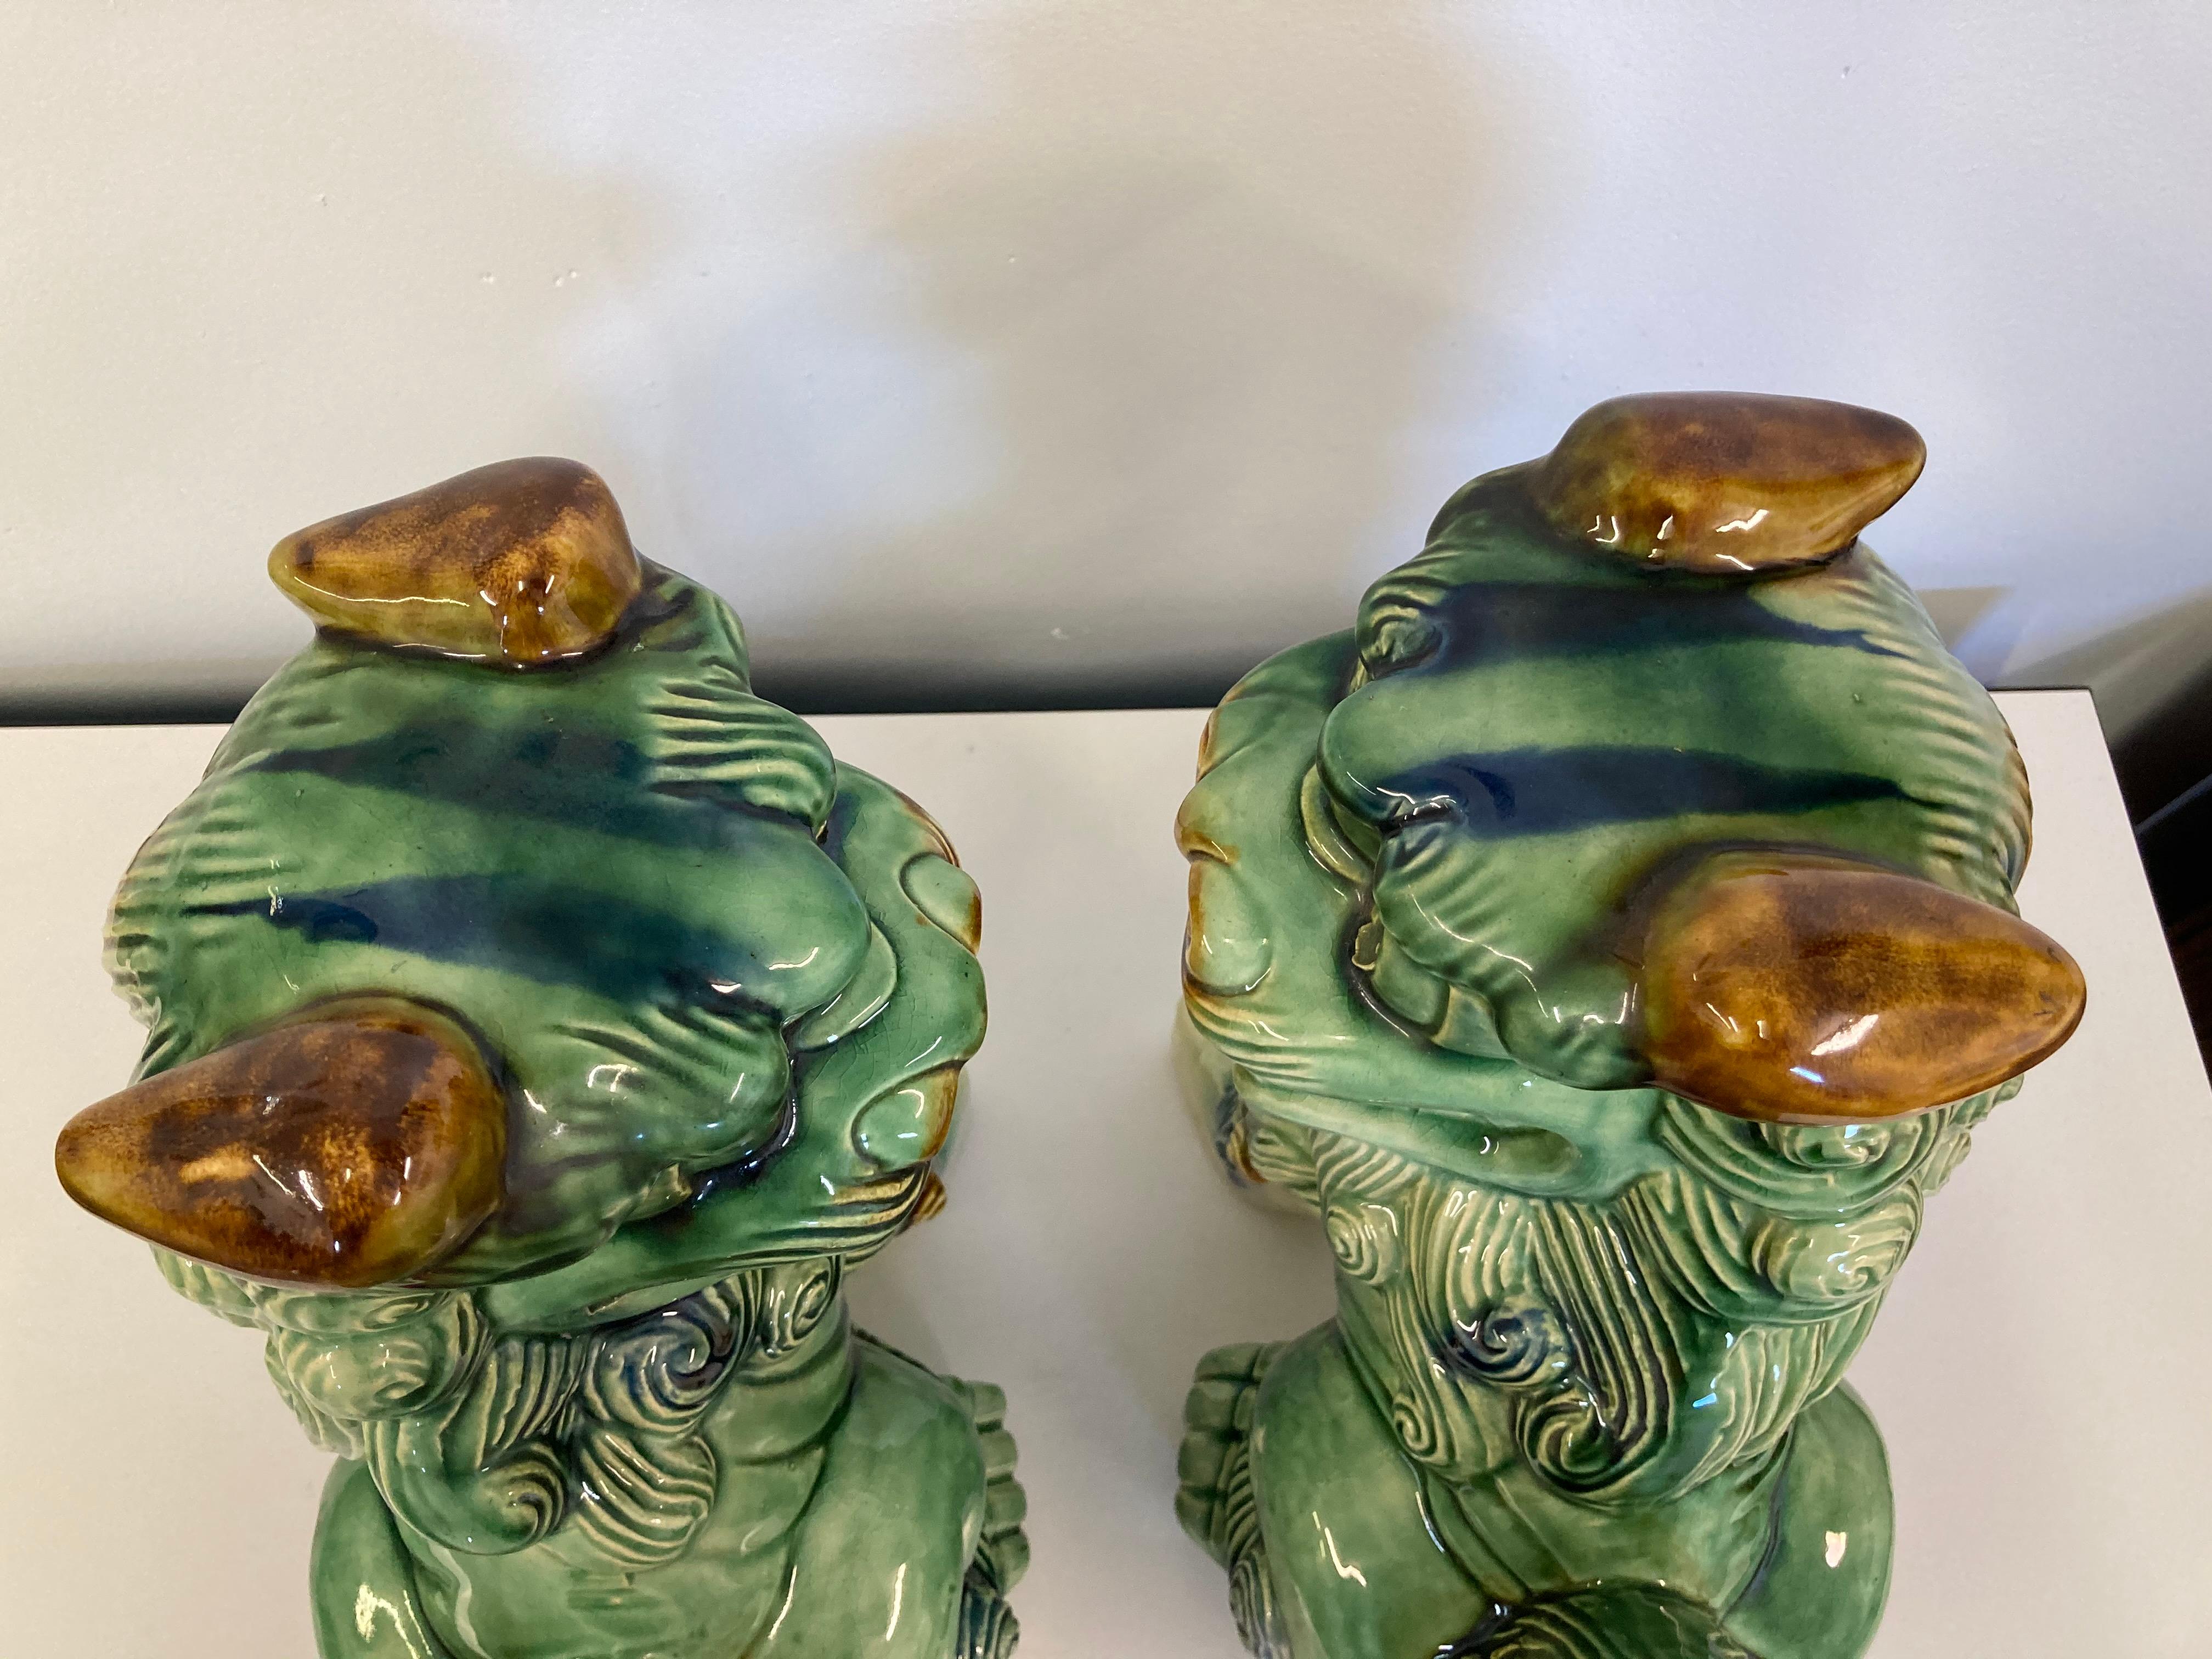 Pair of Vintage/Antique Chinese Porcelain Glazed Foo Dogs Temple Guardians 1